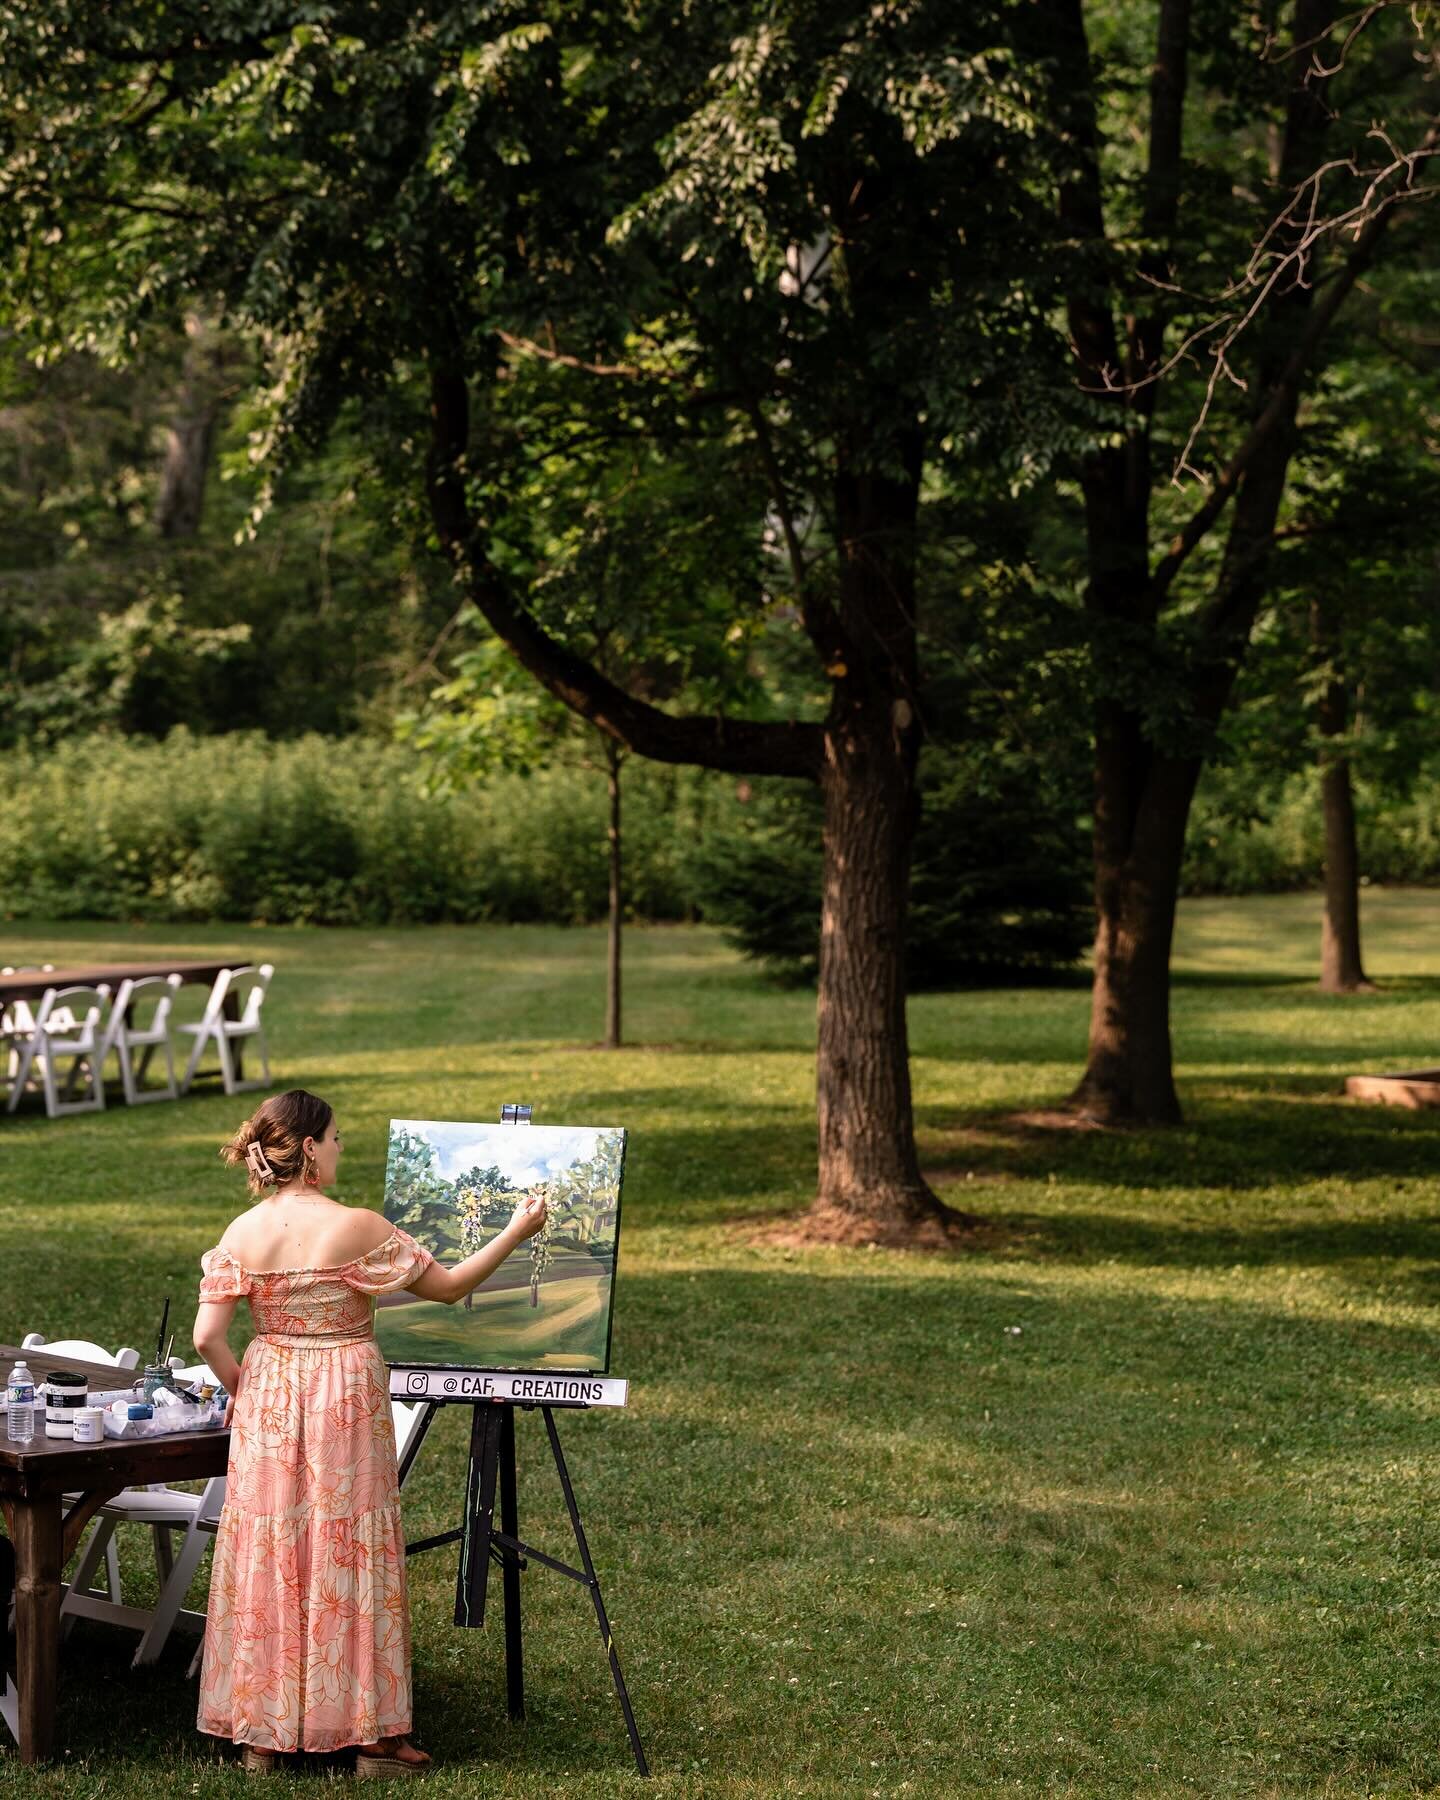 @vitabellaweddingphotography capturing me in my happy place 🥰🥹

Live wedding painting is an elegant, unique addition to your ceremony, cocktail hour, or reception ❤️ And you walk away with a timeless, custom painting to enjoy for generations to com